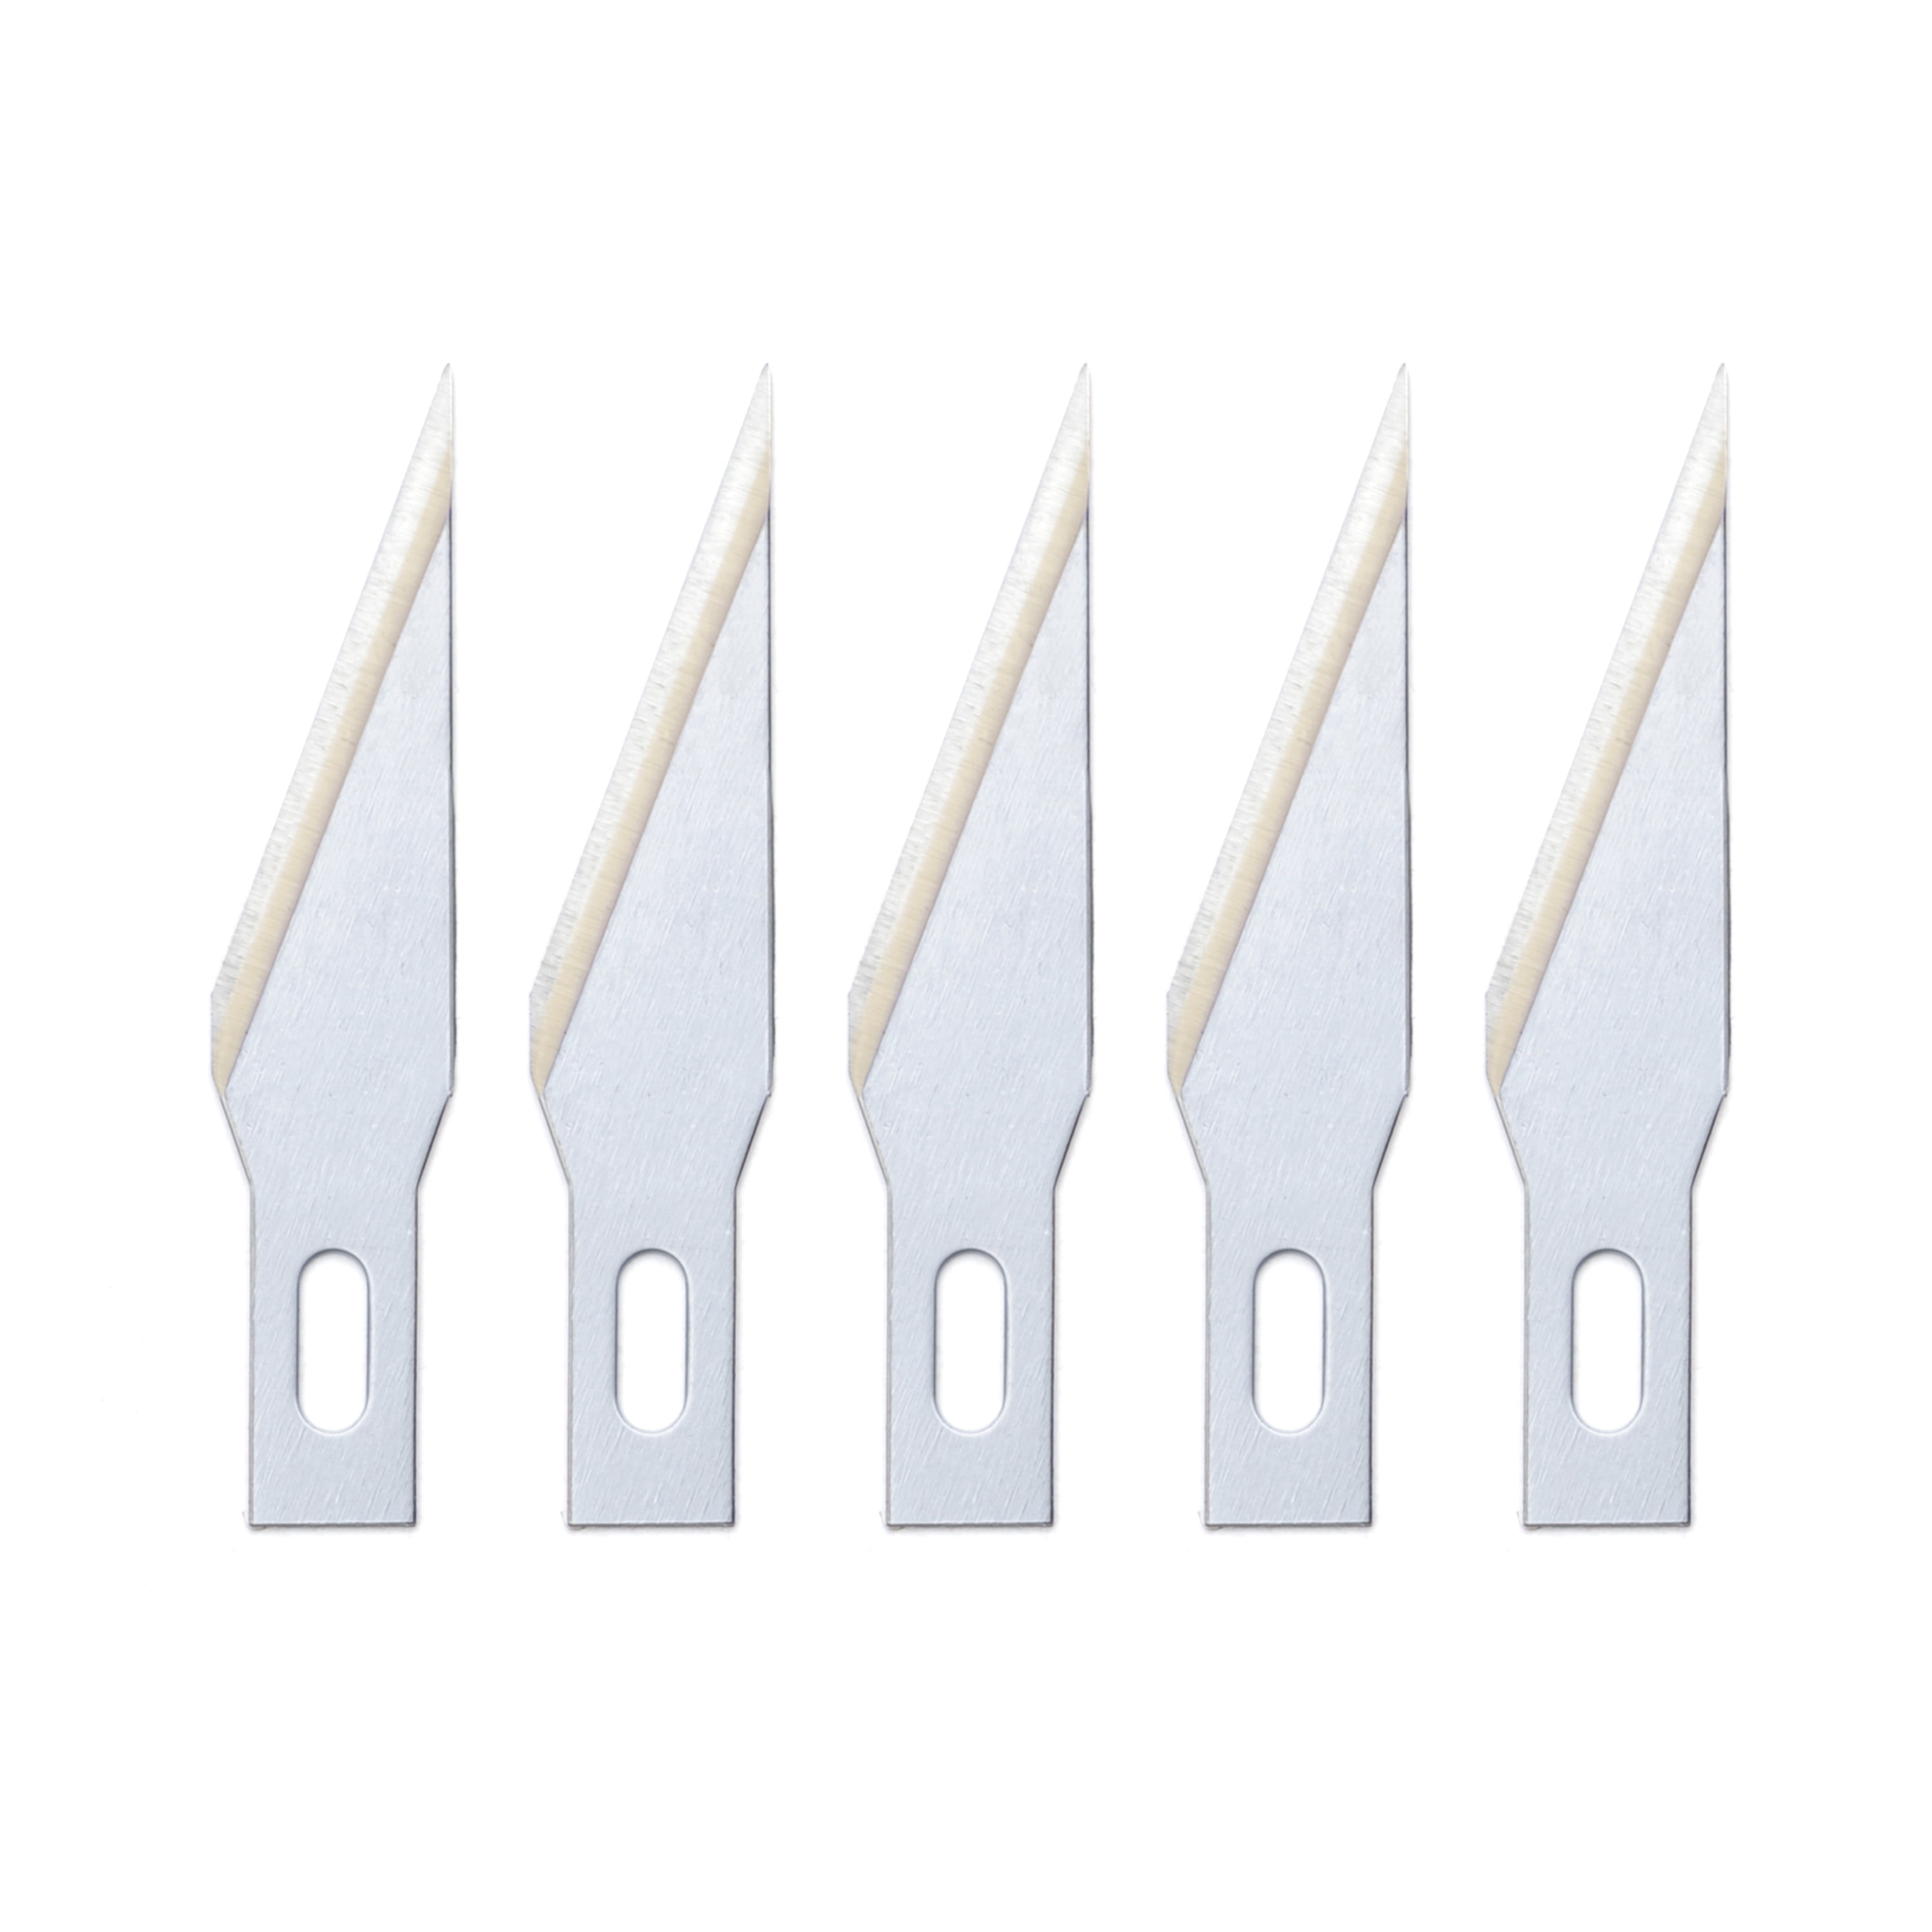 X-Acto Replacement Blades No. 1 Assortment - Midwest Technology Products